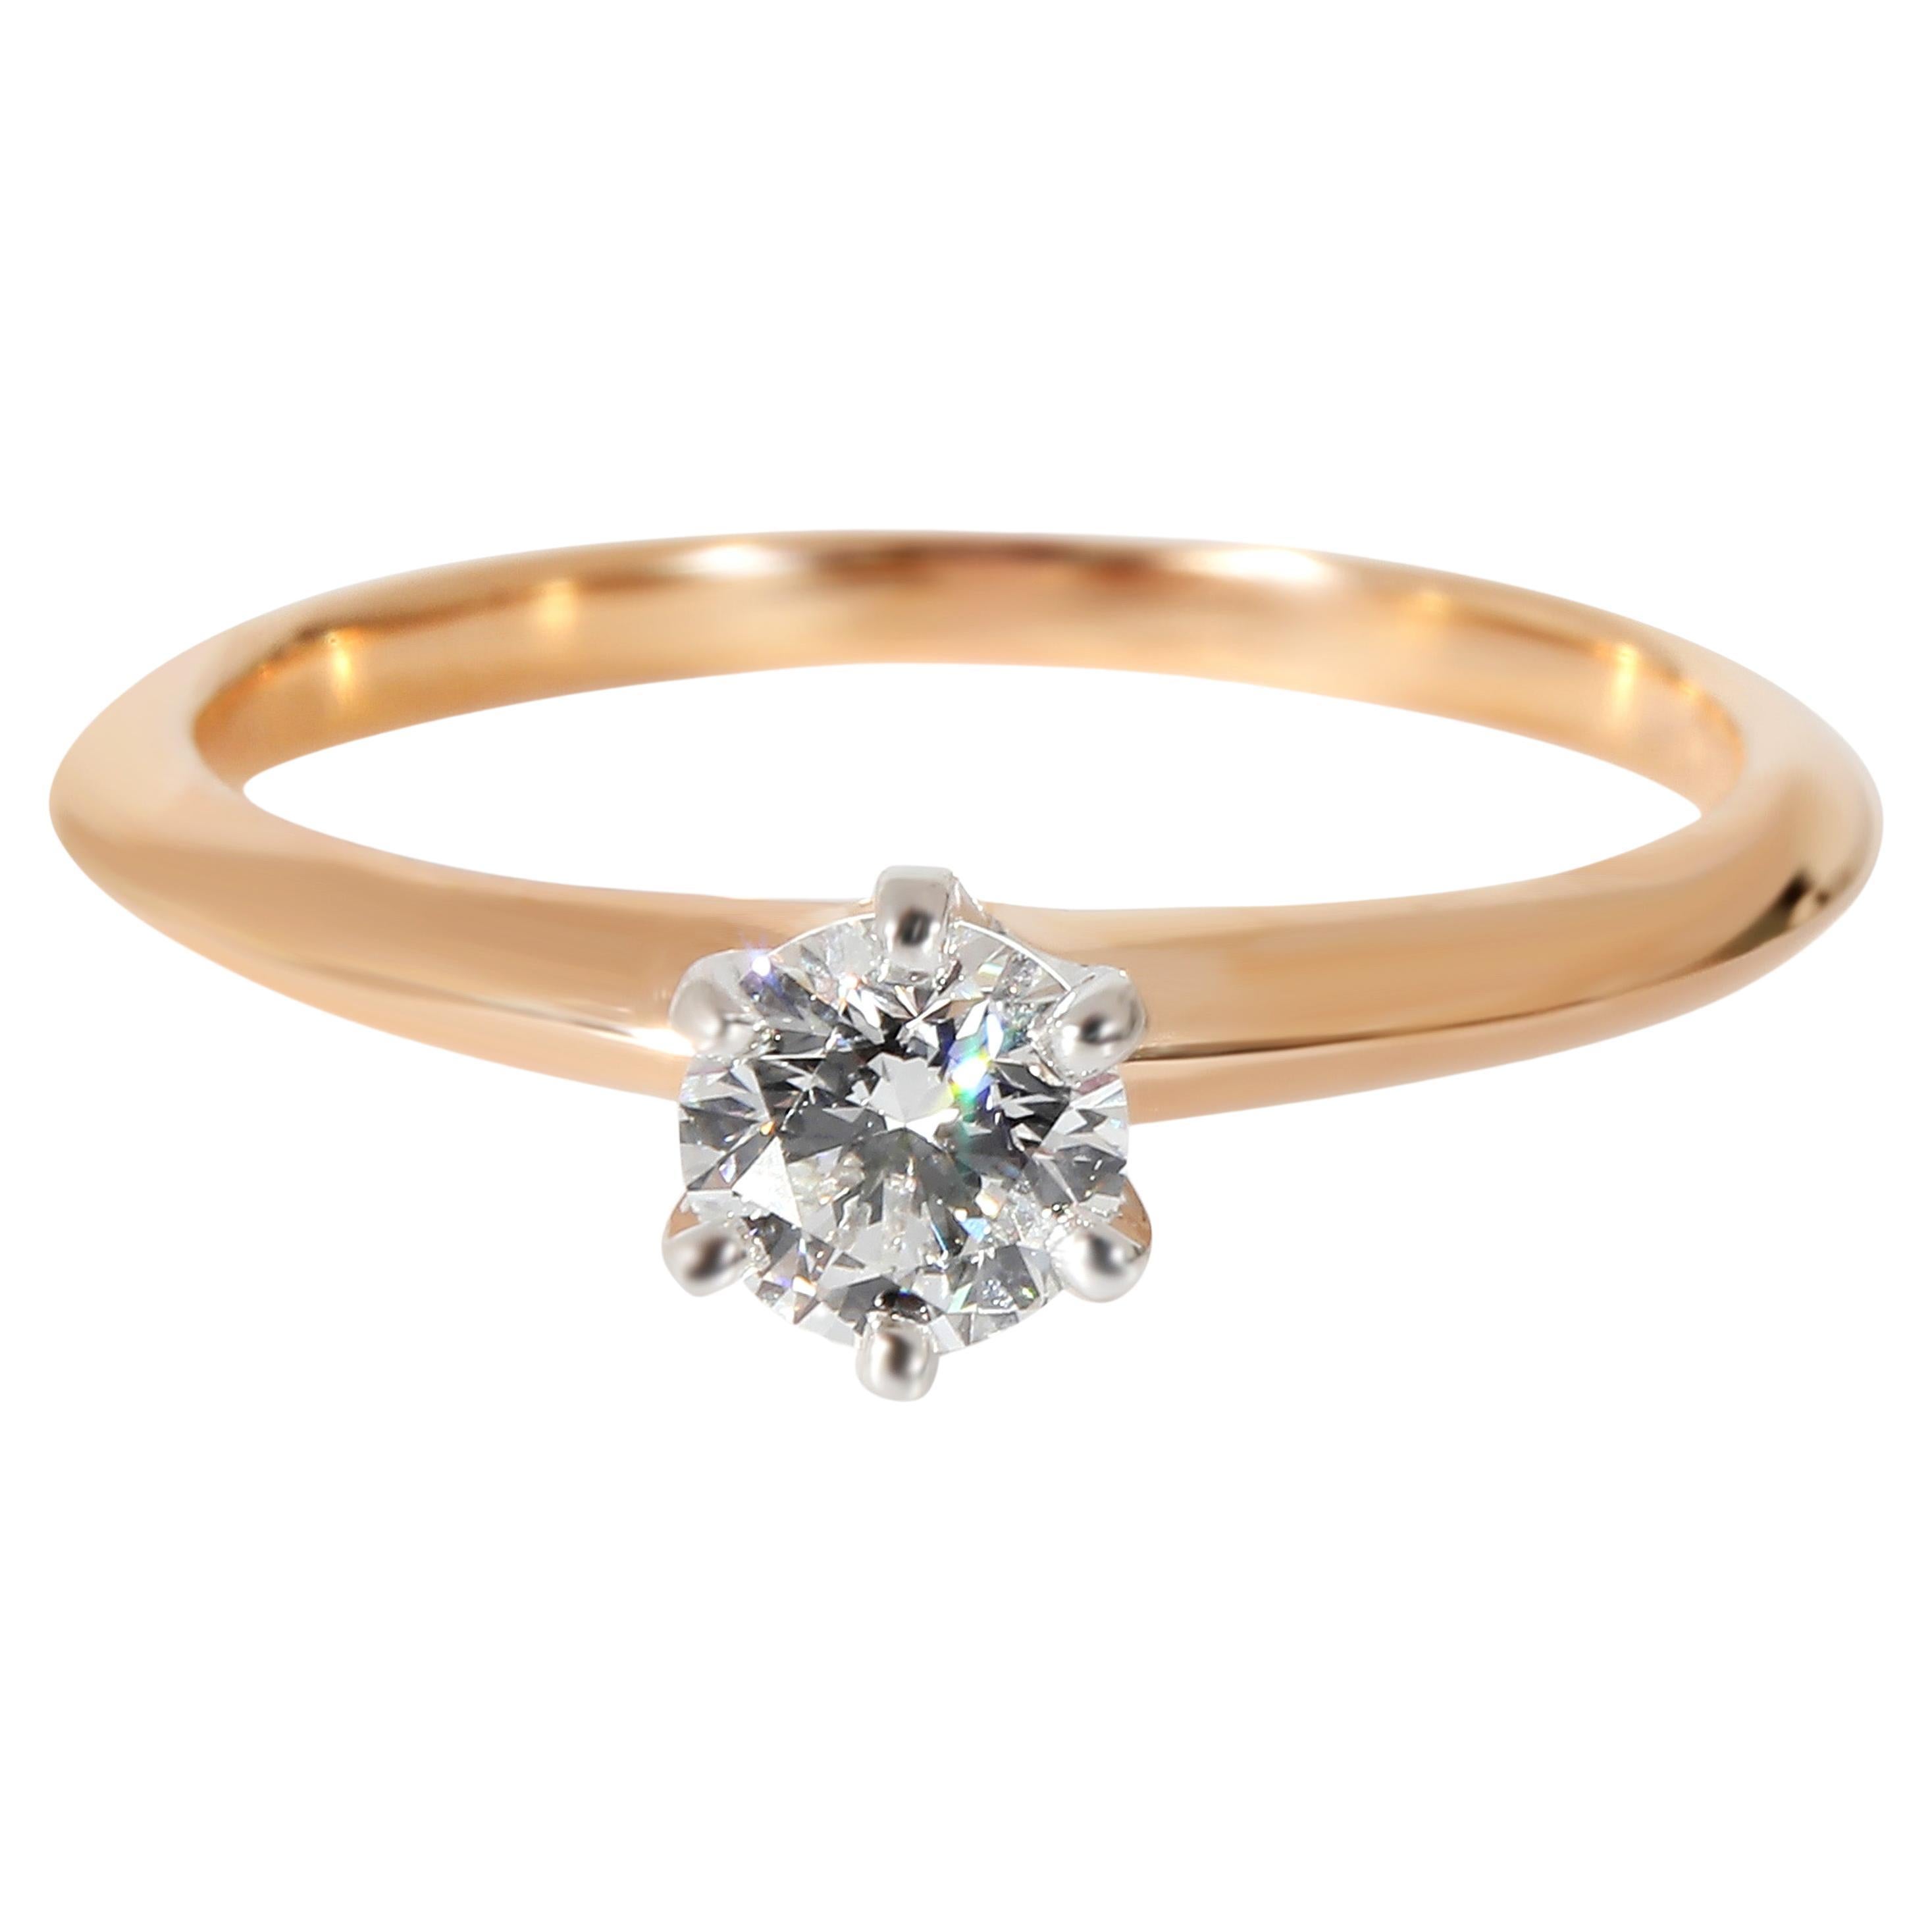 Tiffany & Co. Diamond Engagement Ring in 18k Pink Gold/Platinum F IF 0.3 CTW For Sale